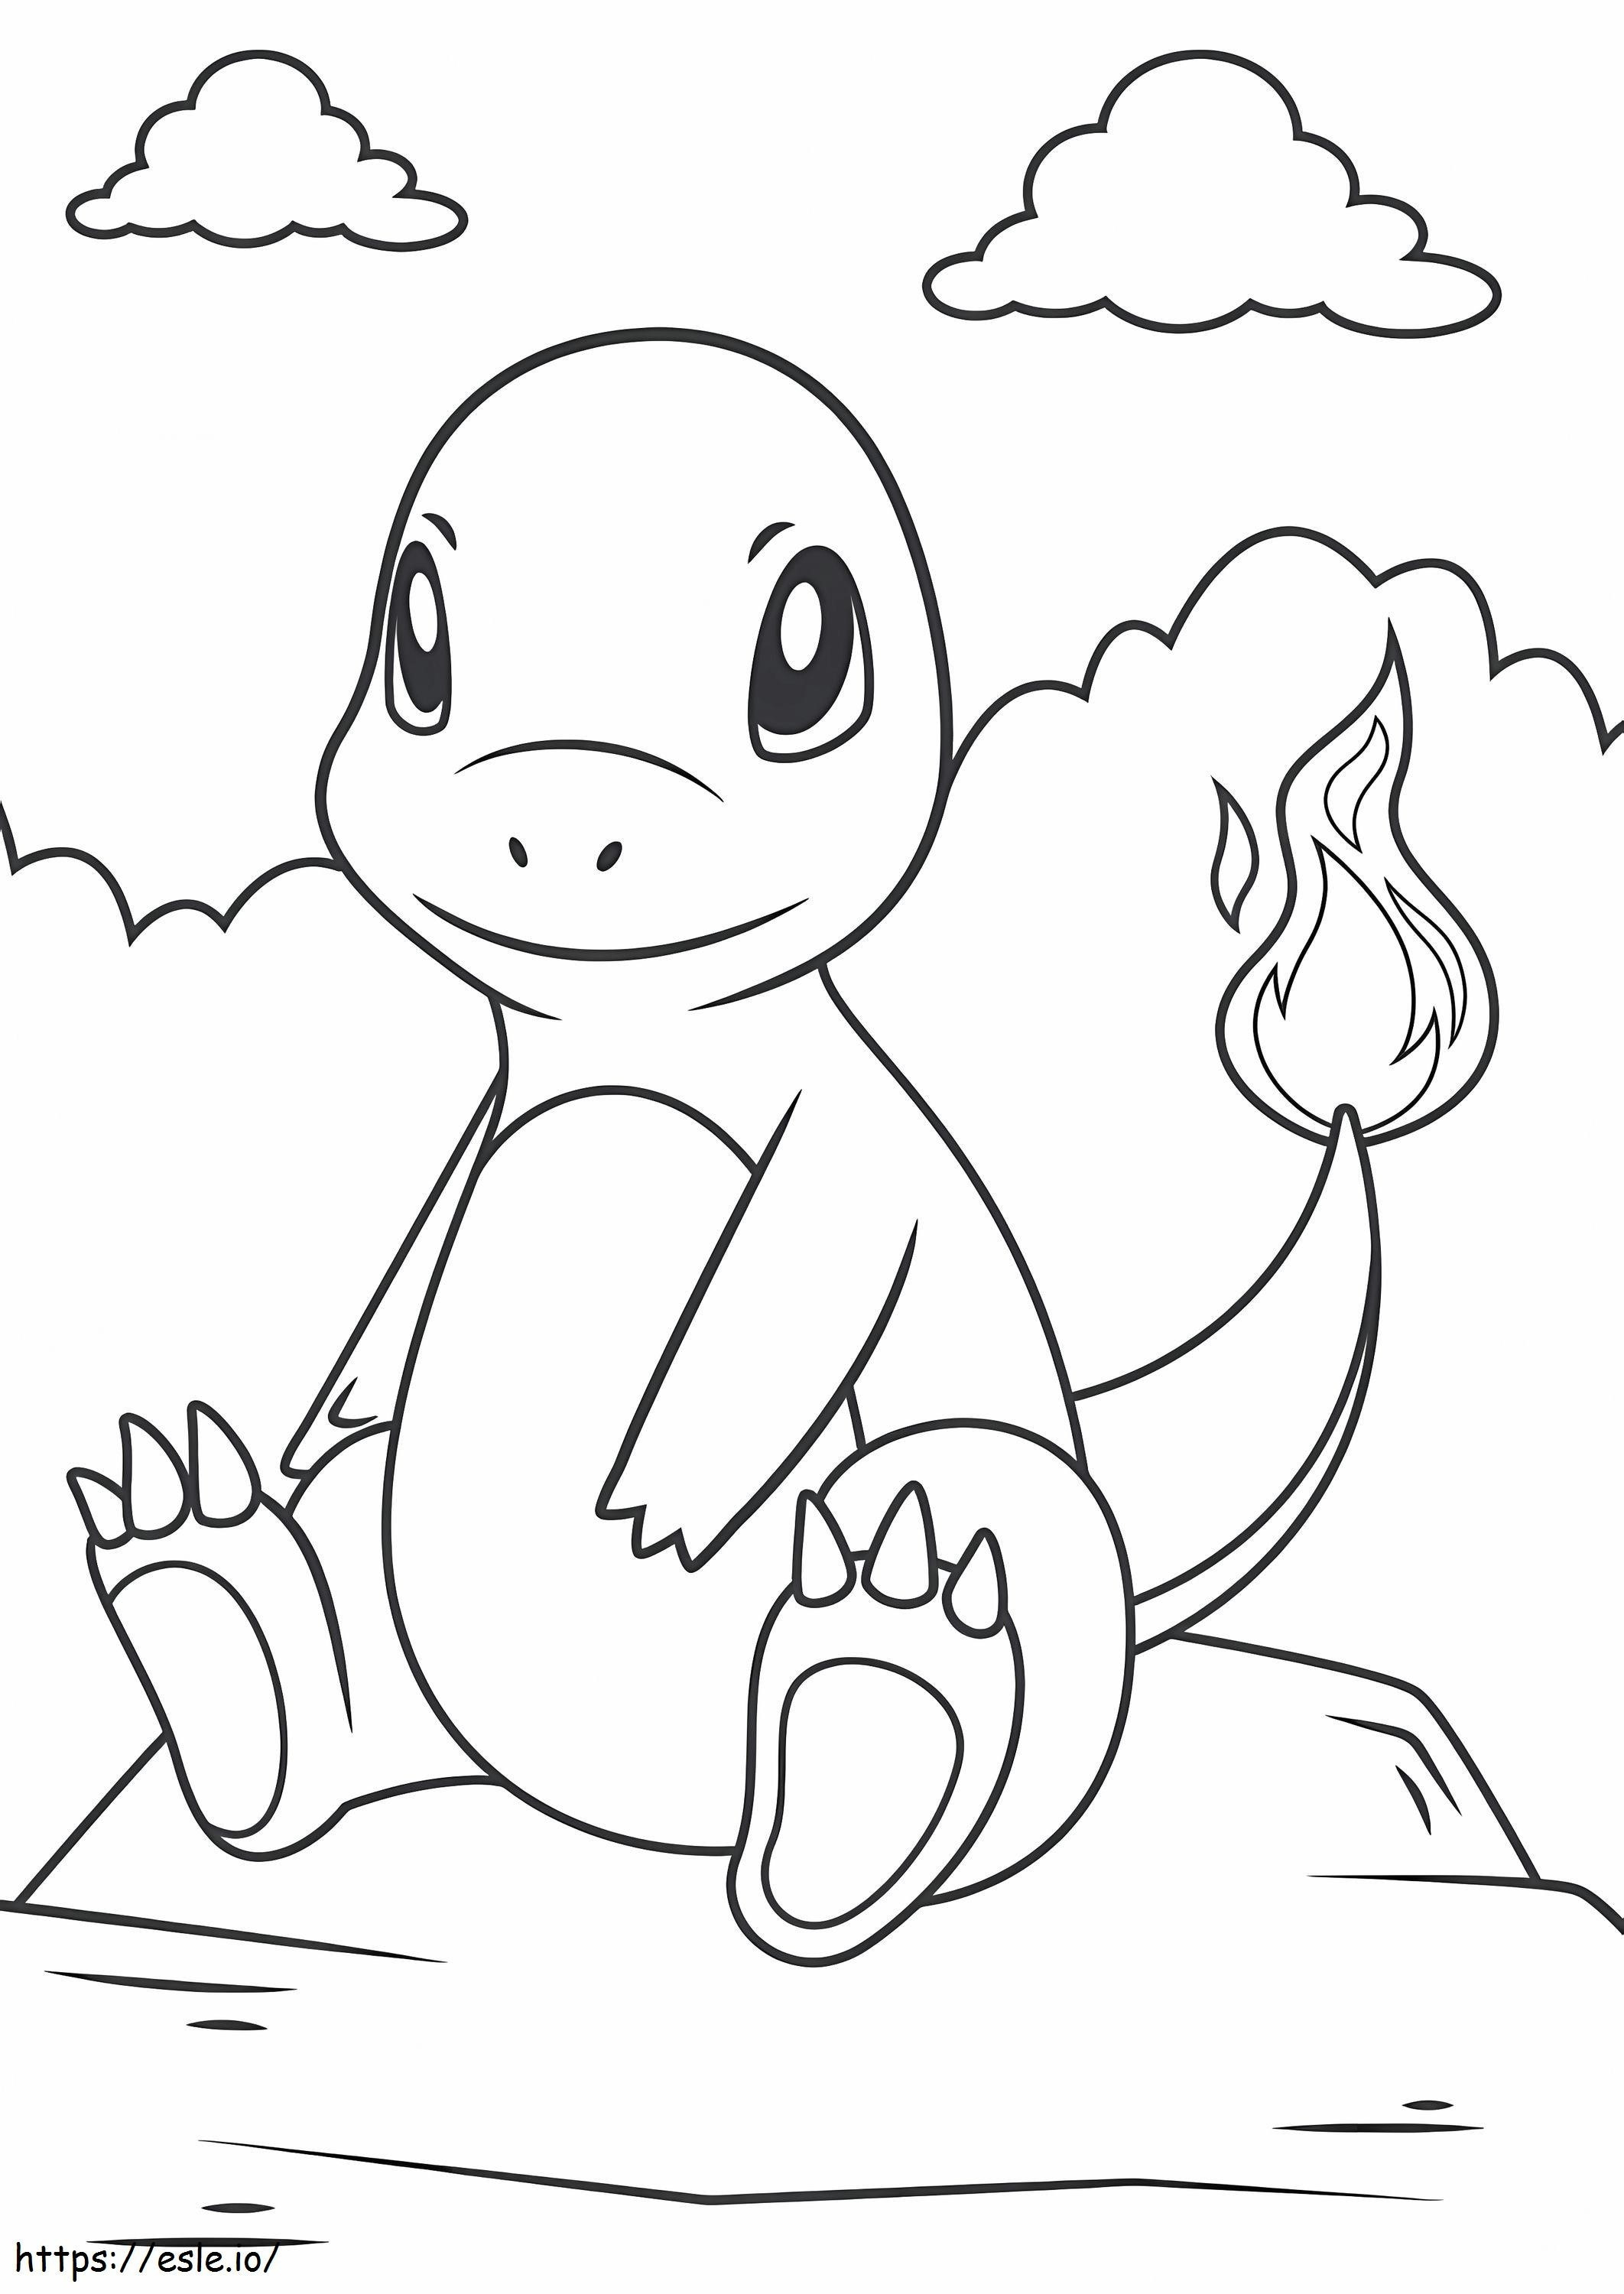 Salamiche Assis coloring page